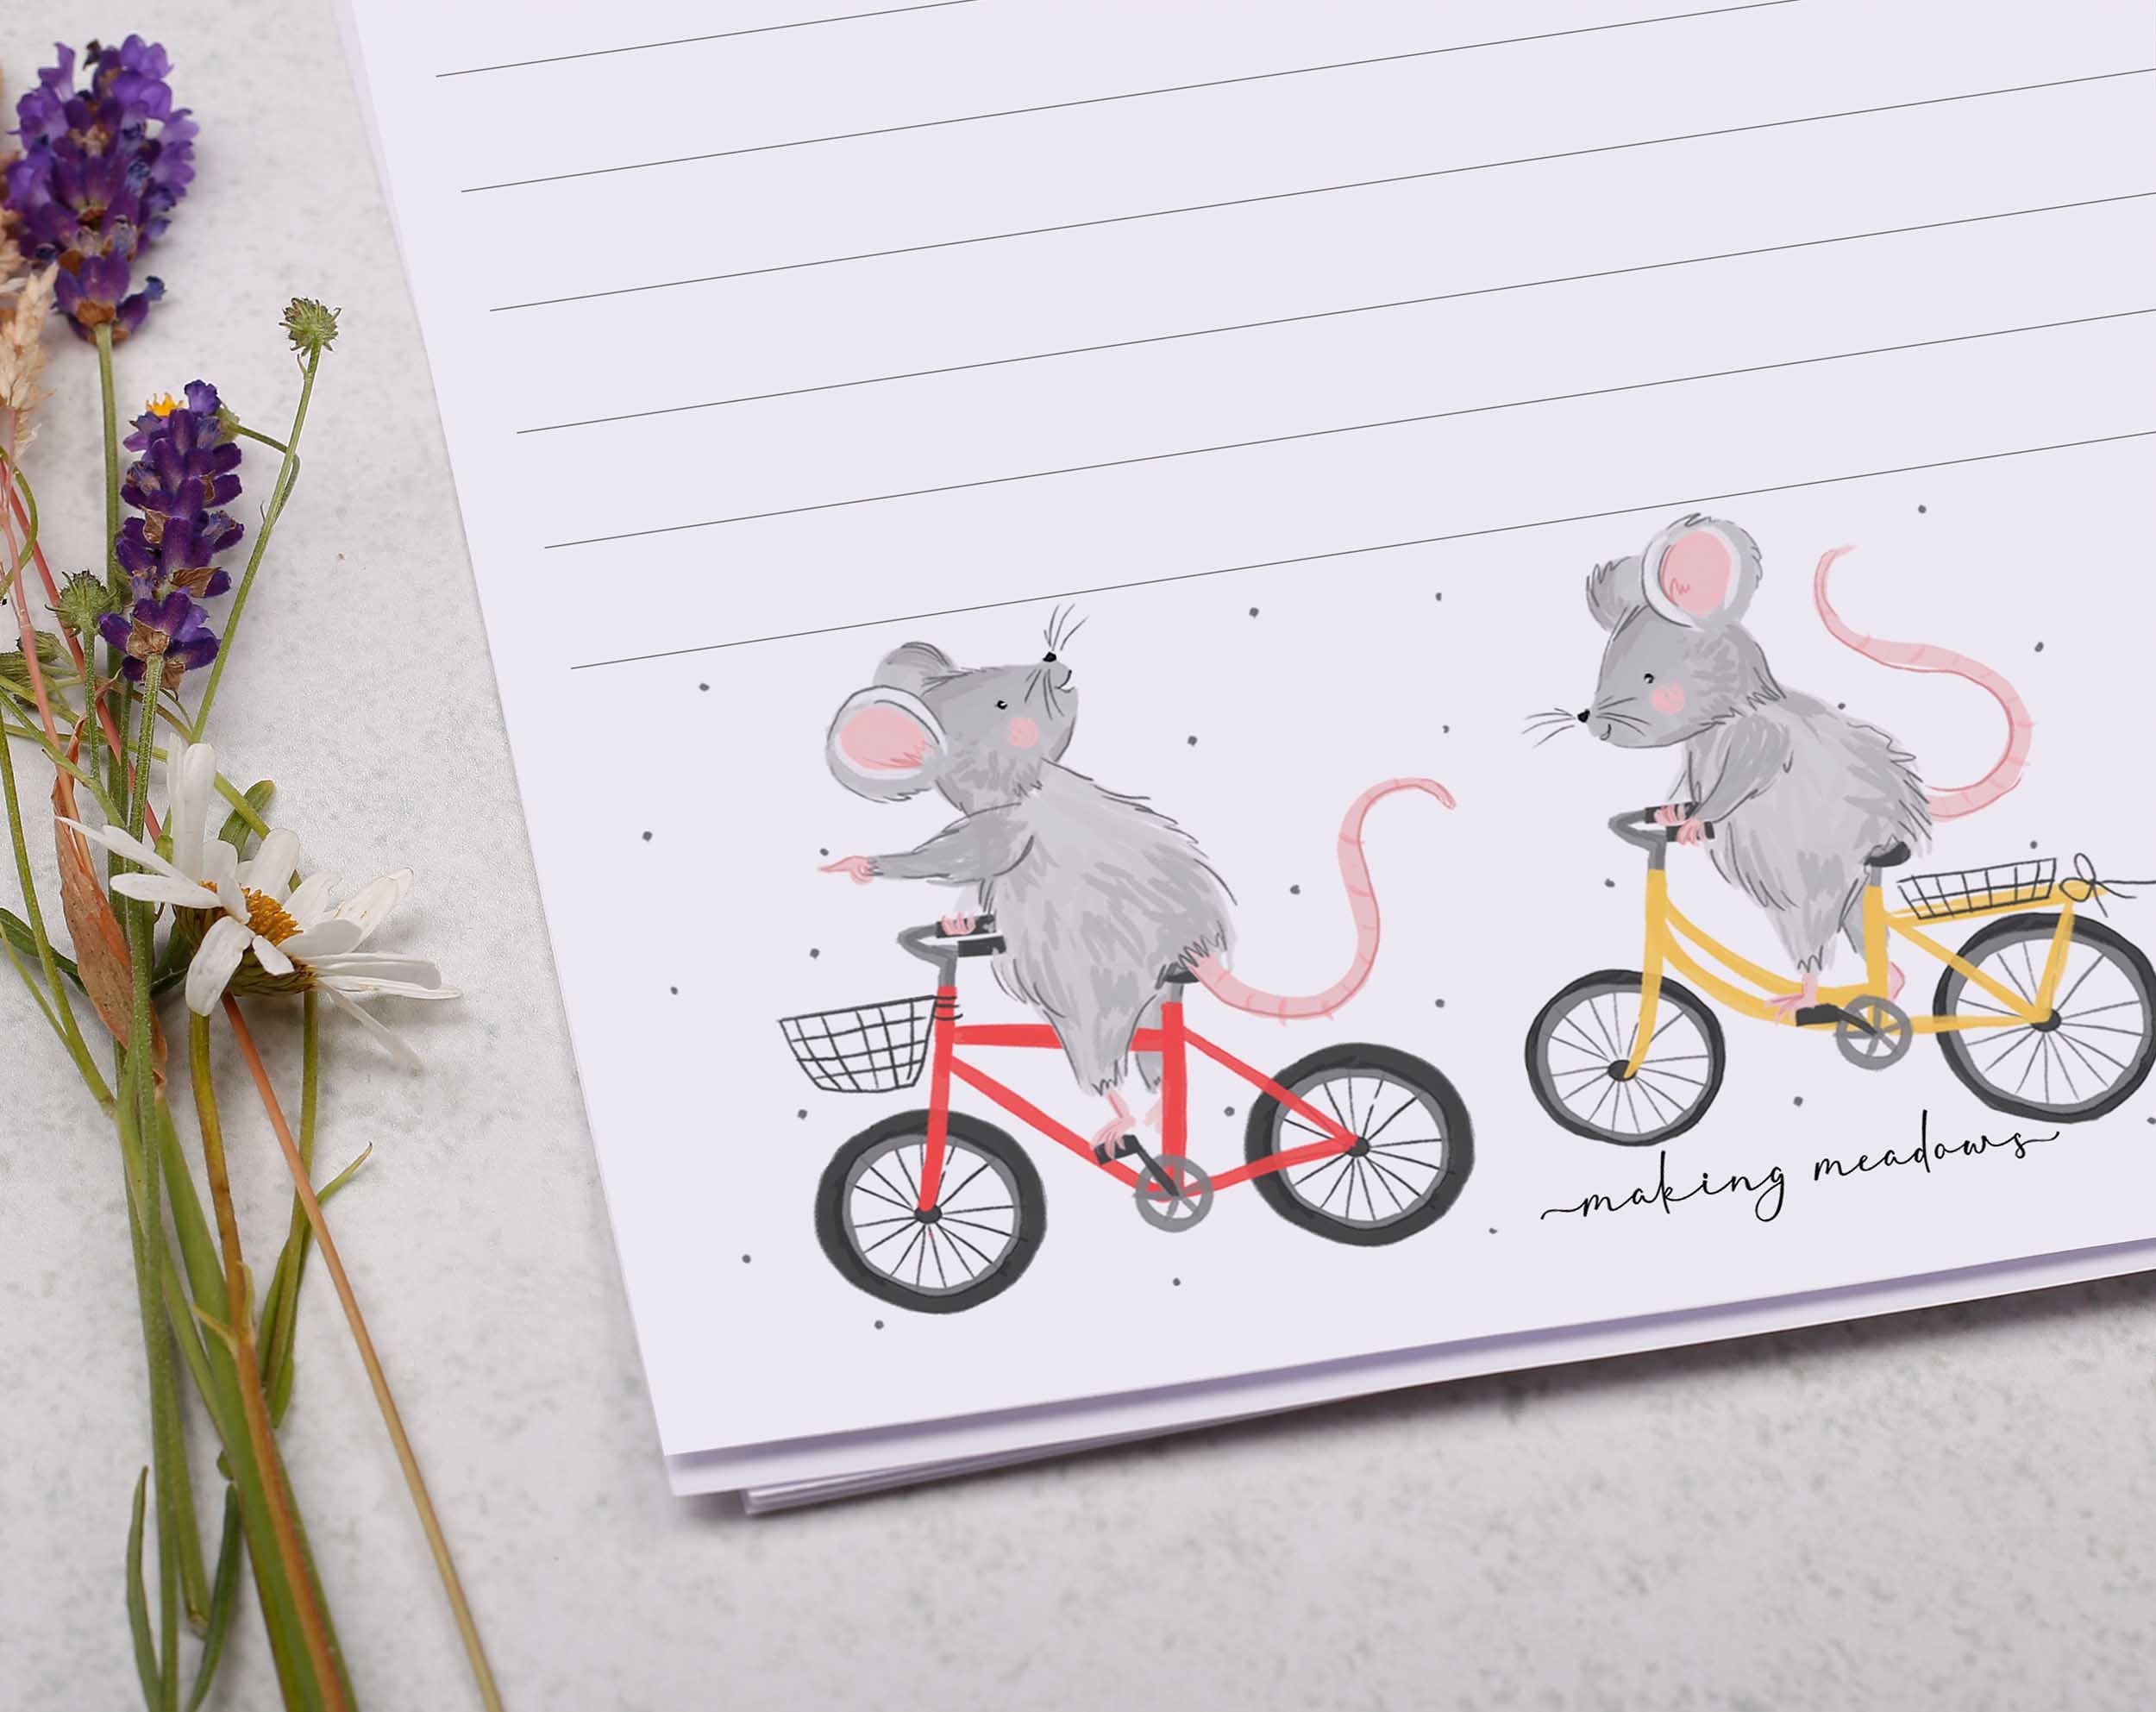 Premium personalised A5 letter writing paper set for children with a family of mice cycling along. 